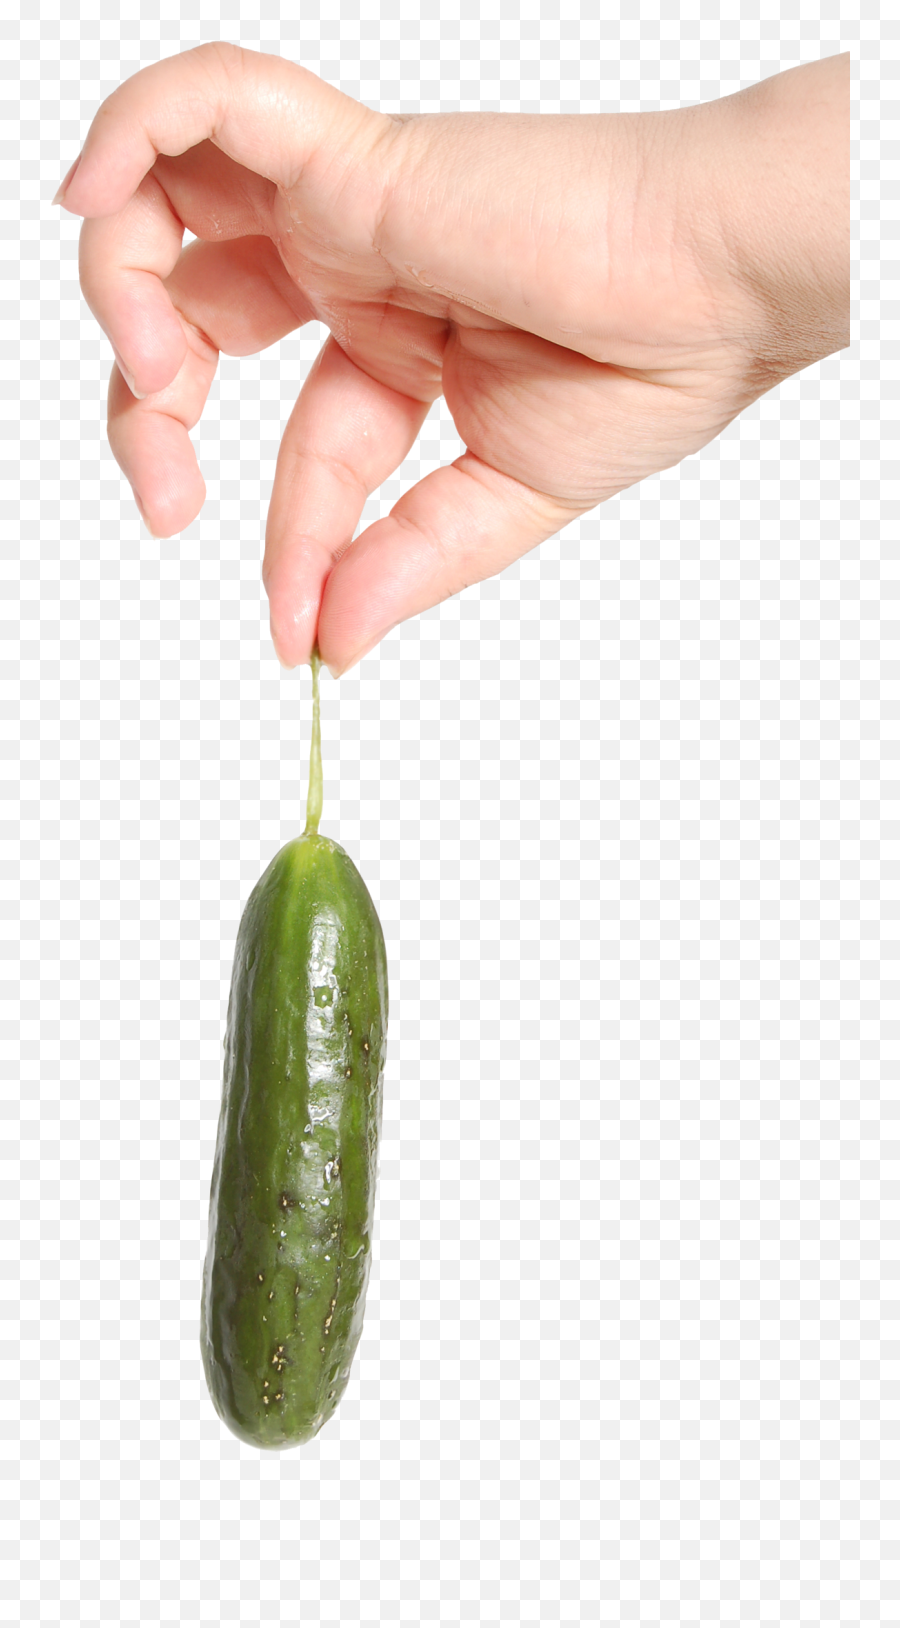 Cucumber In Hand Png Image - Purepng Free Transparent Cc0 Holding Cucumber In Hand Emoji,Cucumber Clipart